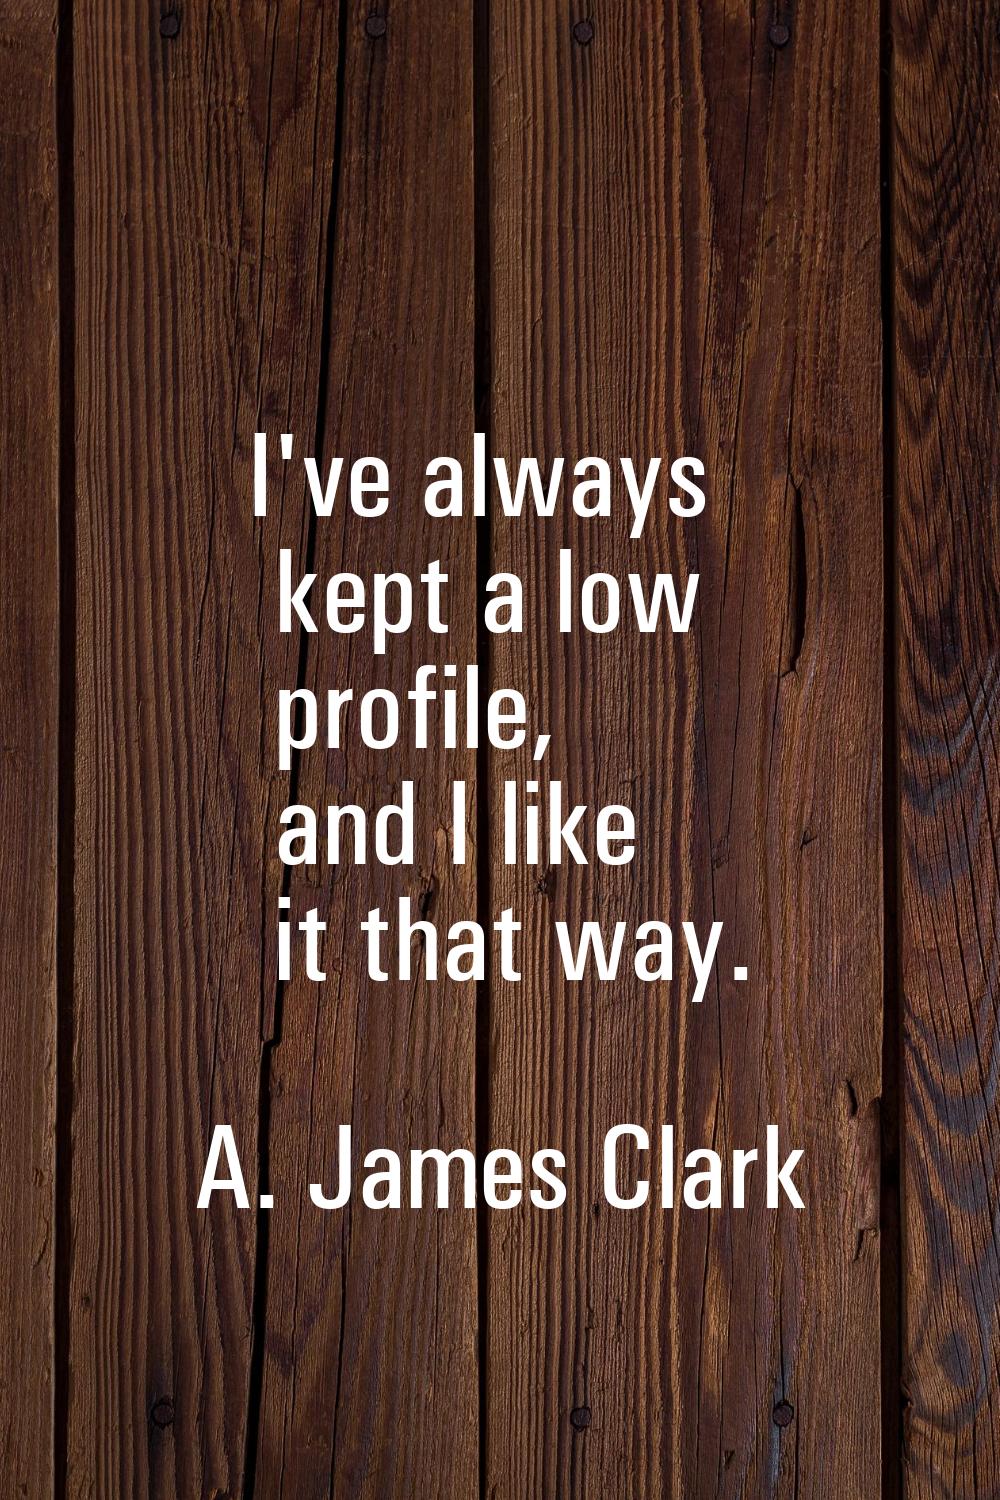 I've always kept a low profile, and I like it that way.